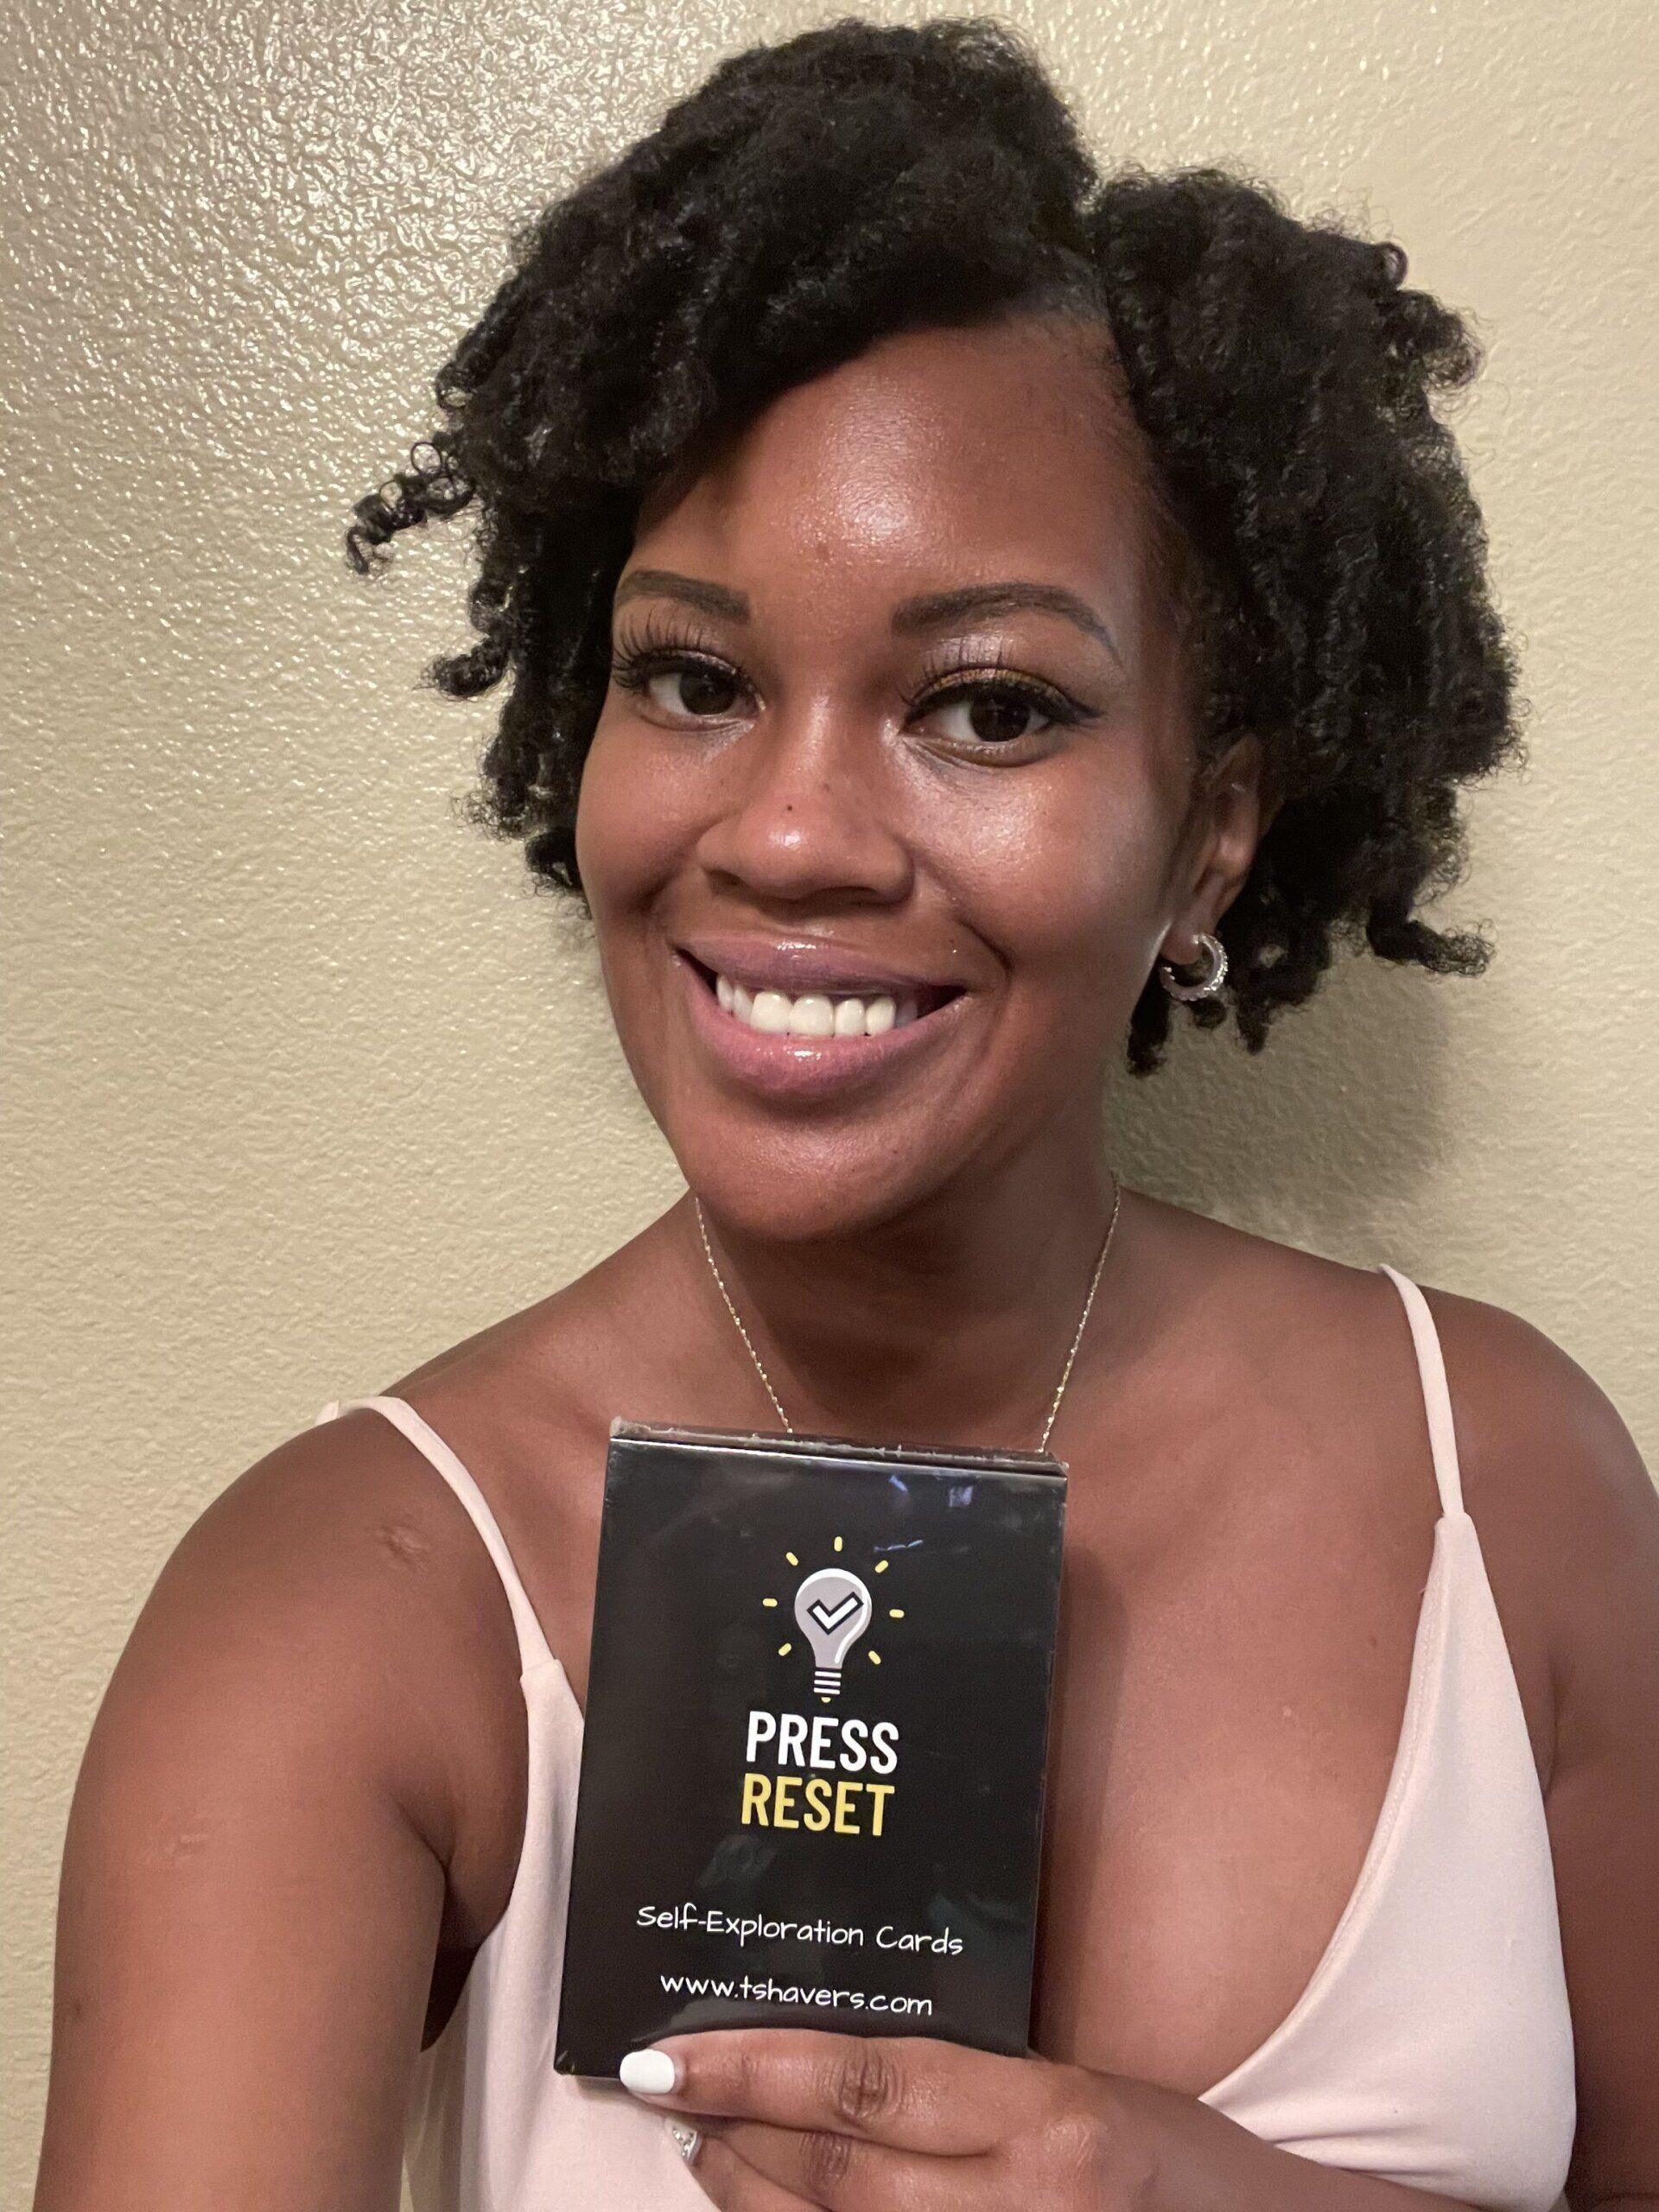 A pretty young woman stands against a wall and smiles while holding up her new Press Reset affirmation cards.